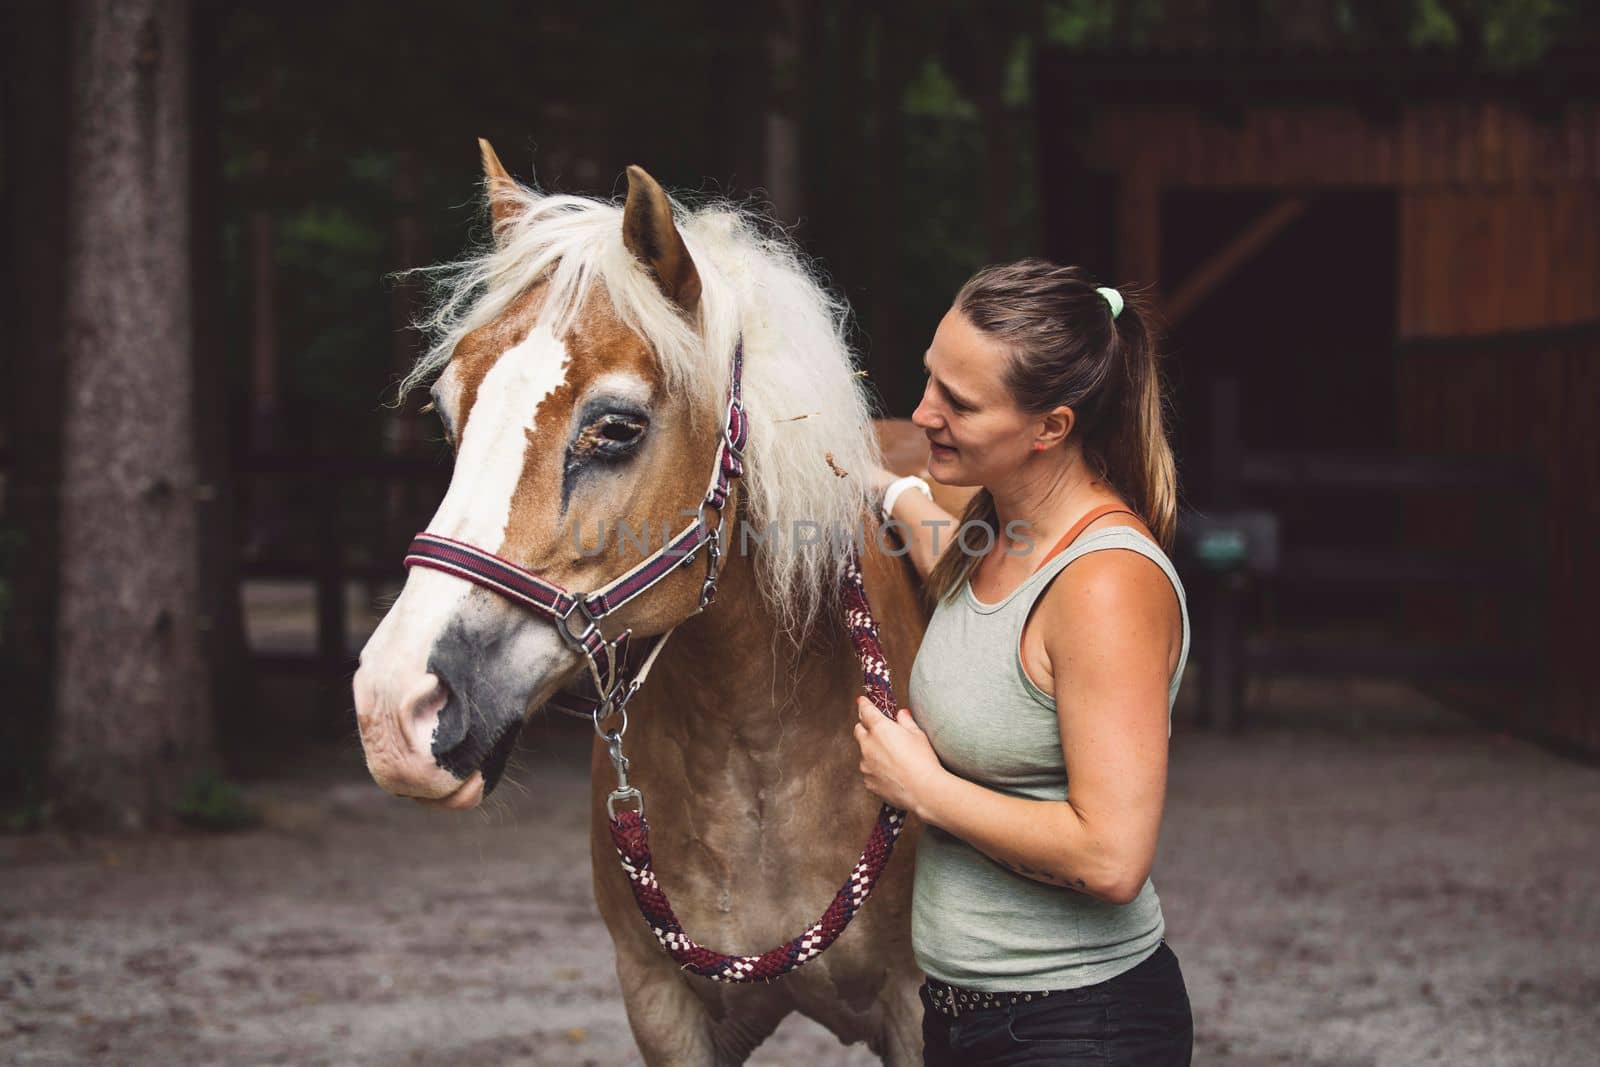 Caucasian woman taking care of her horse in the stables and out, brushing his har with a hairbrush. Beautiful friendly brown horse waiting patiently for his owner to clean him.